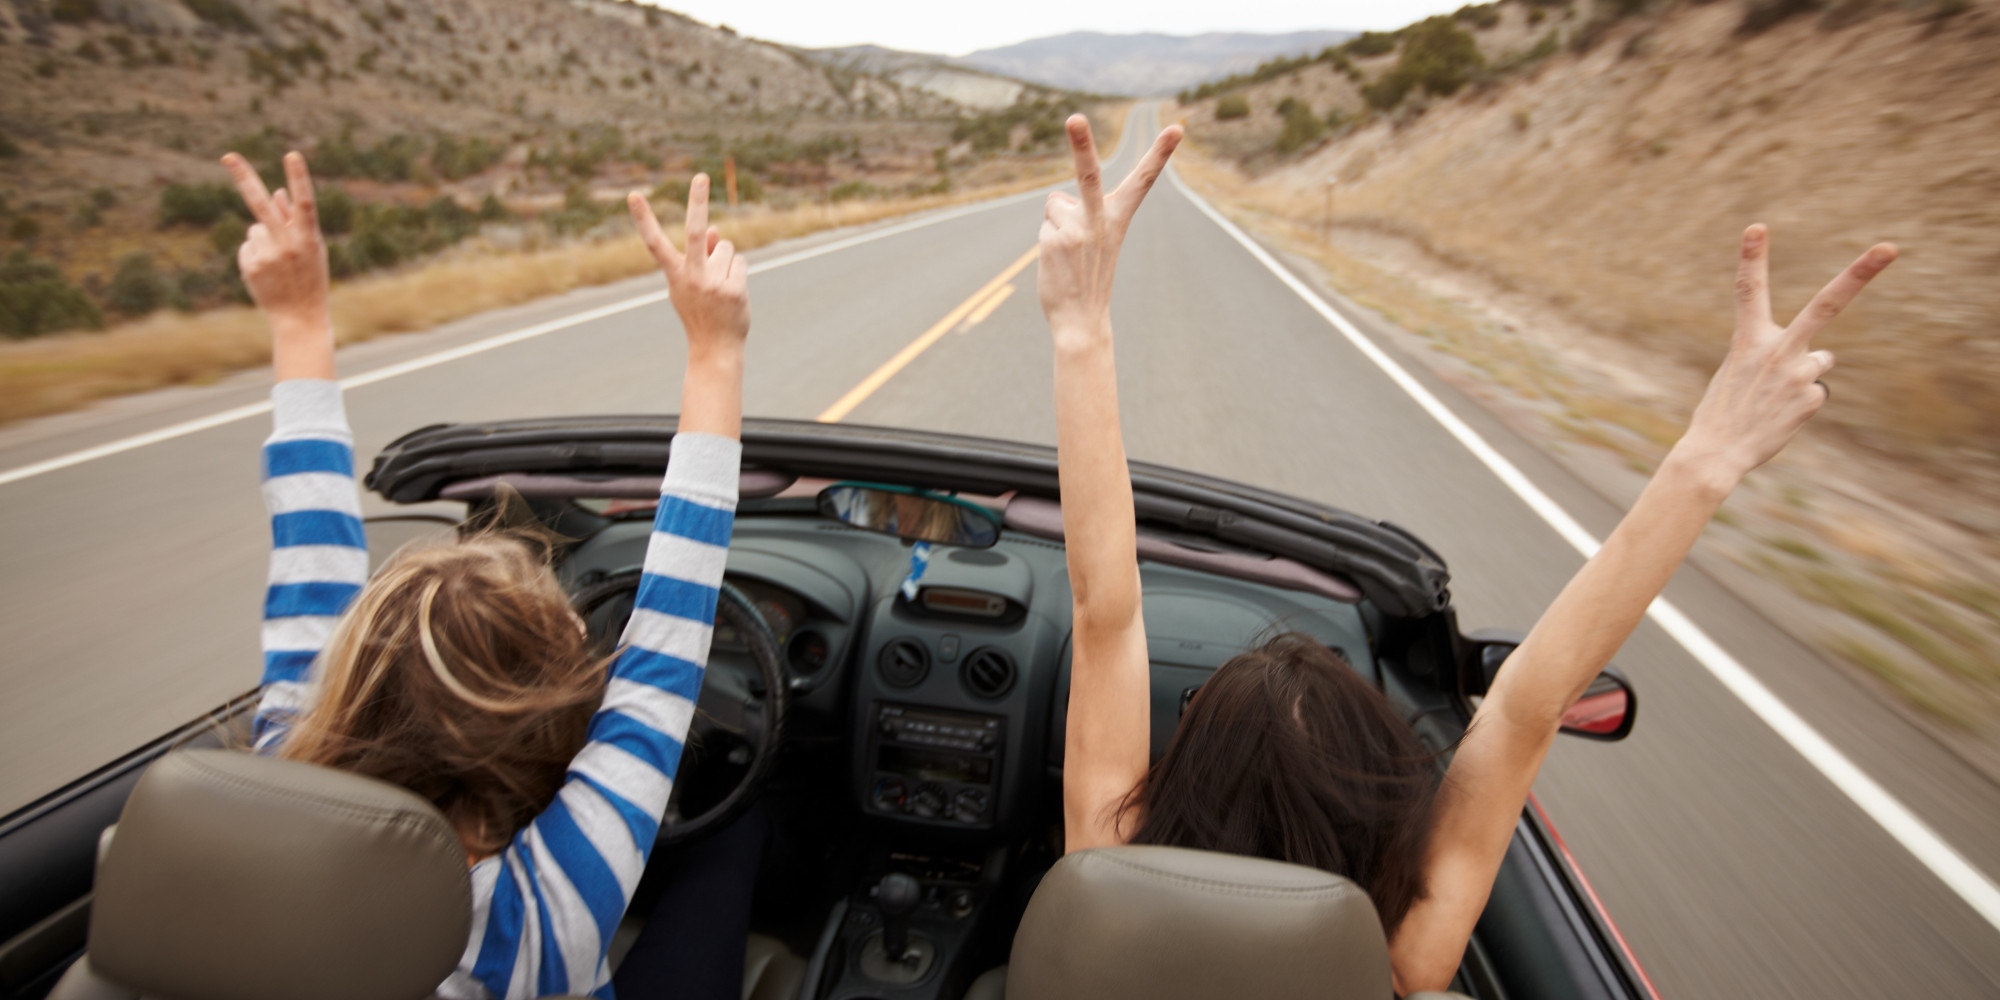 If you are planning that fun road trip with your friends and family you have been talking about for a while, some driving safety tips should be in order.